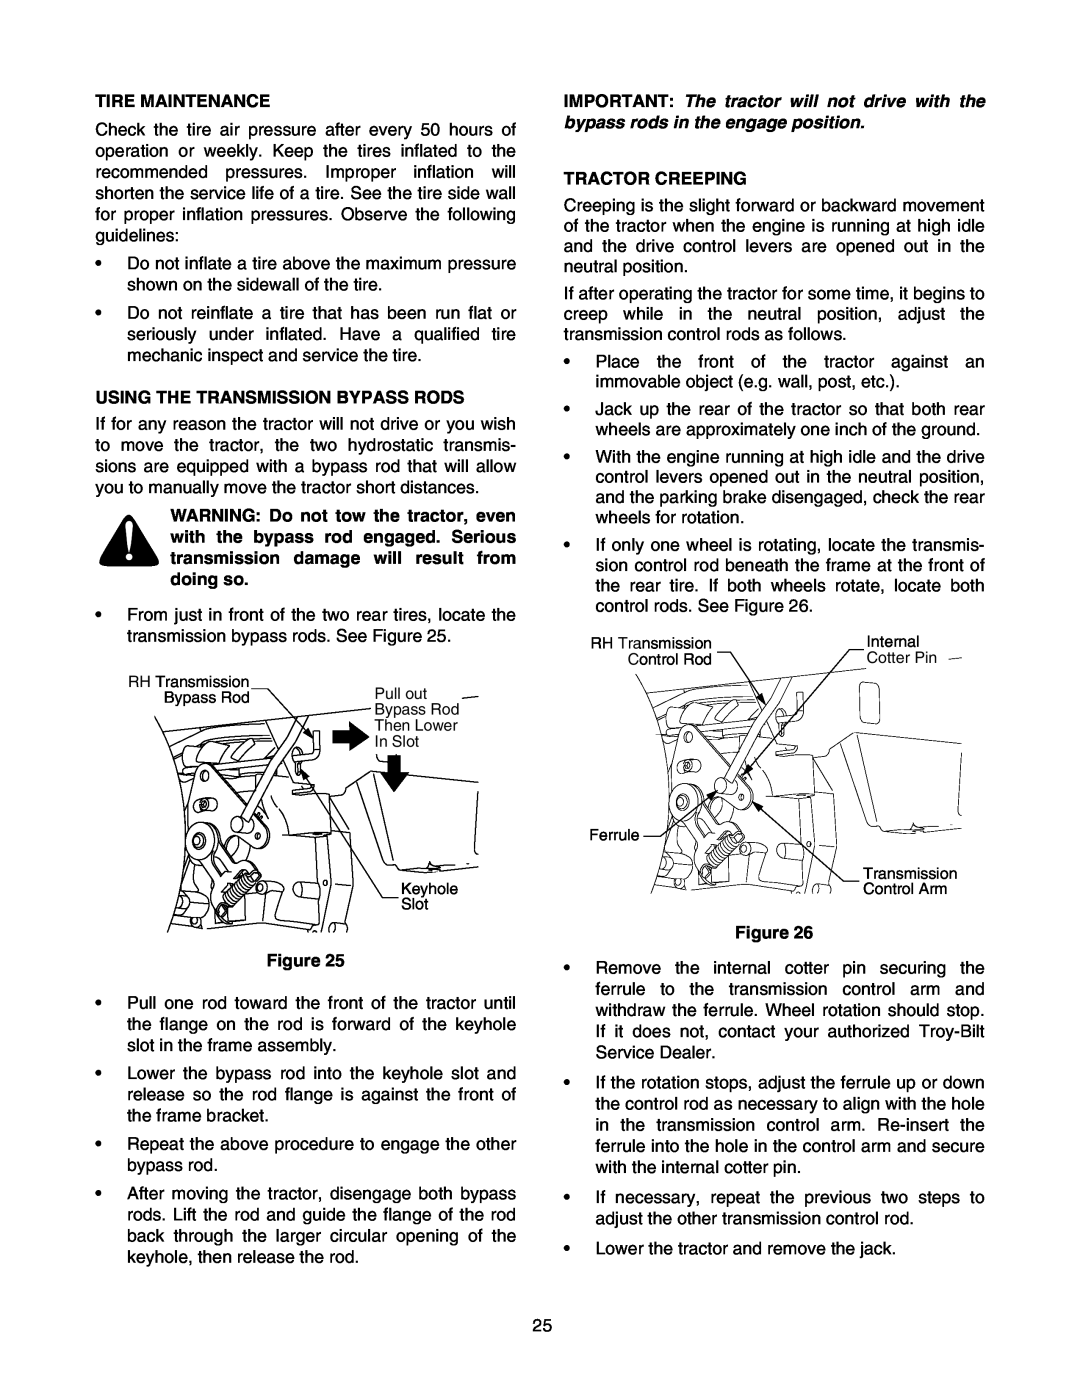 Troy-Bilt RZT 50 manual Tire Maintenance, Using The Transmission Bypass Rods, Tractor Creeping 